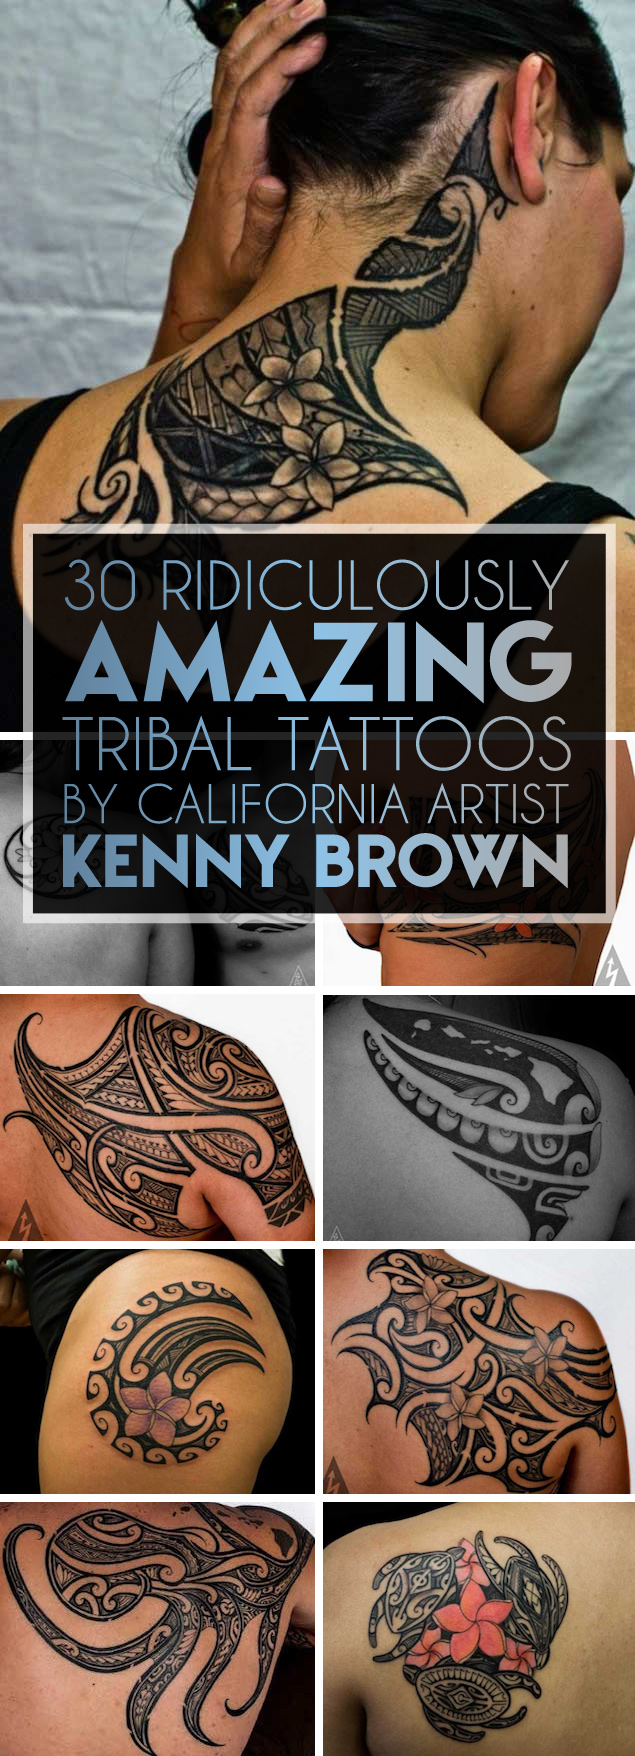 Must See Tribal Tattoos by California Artist Kenny Brown